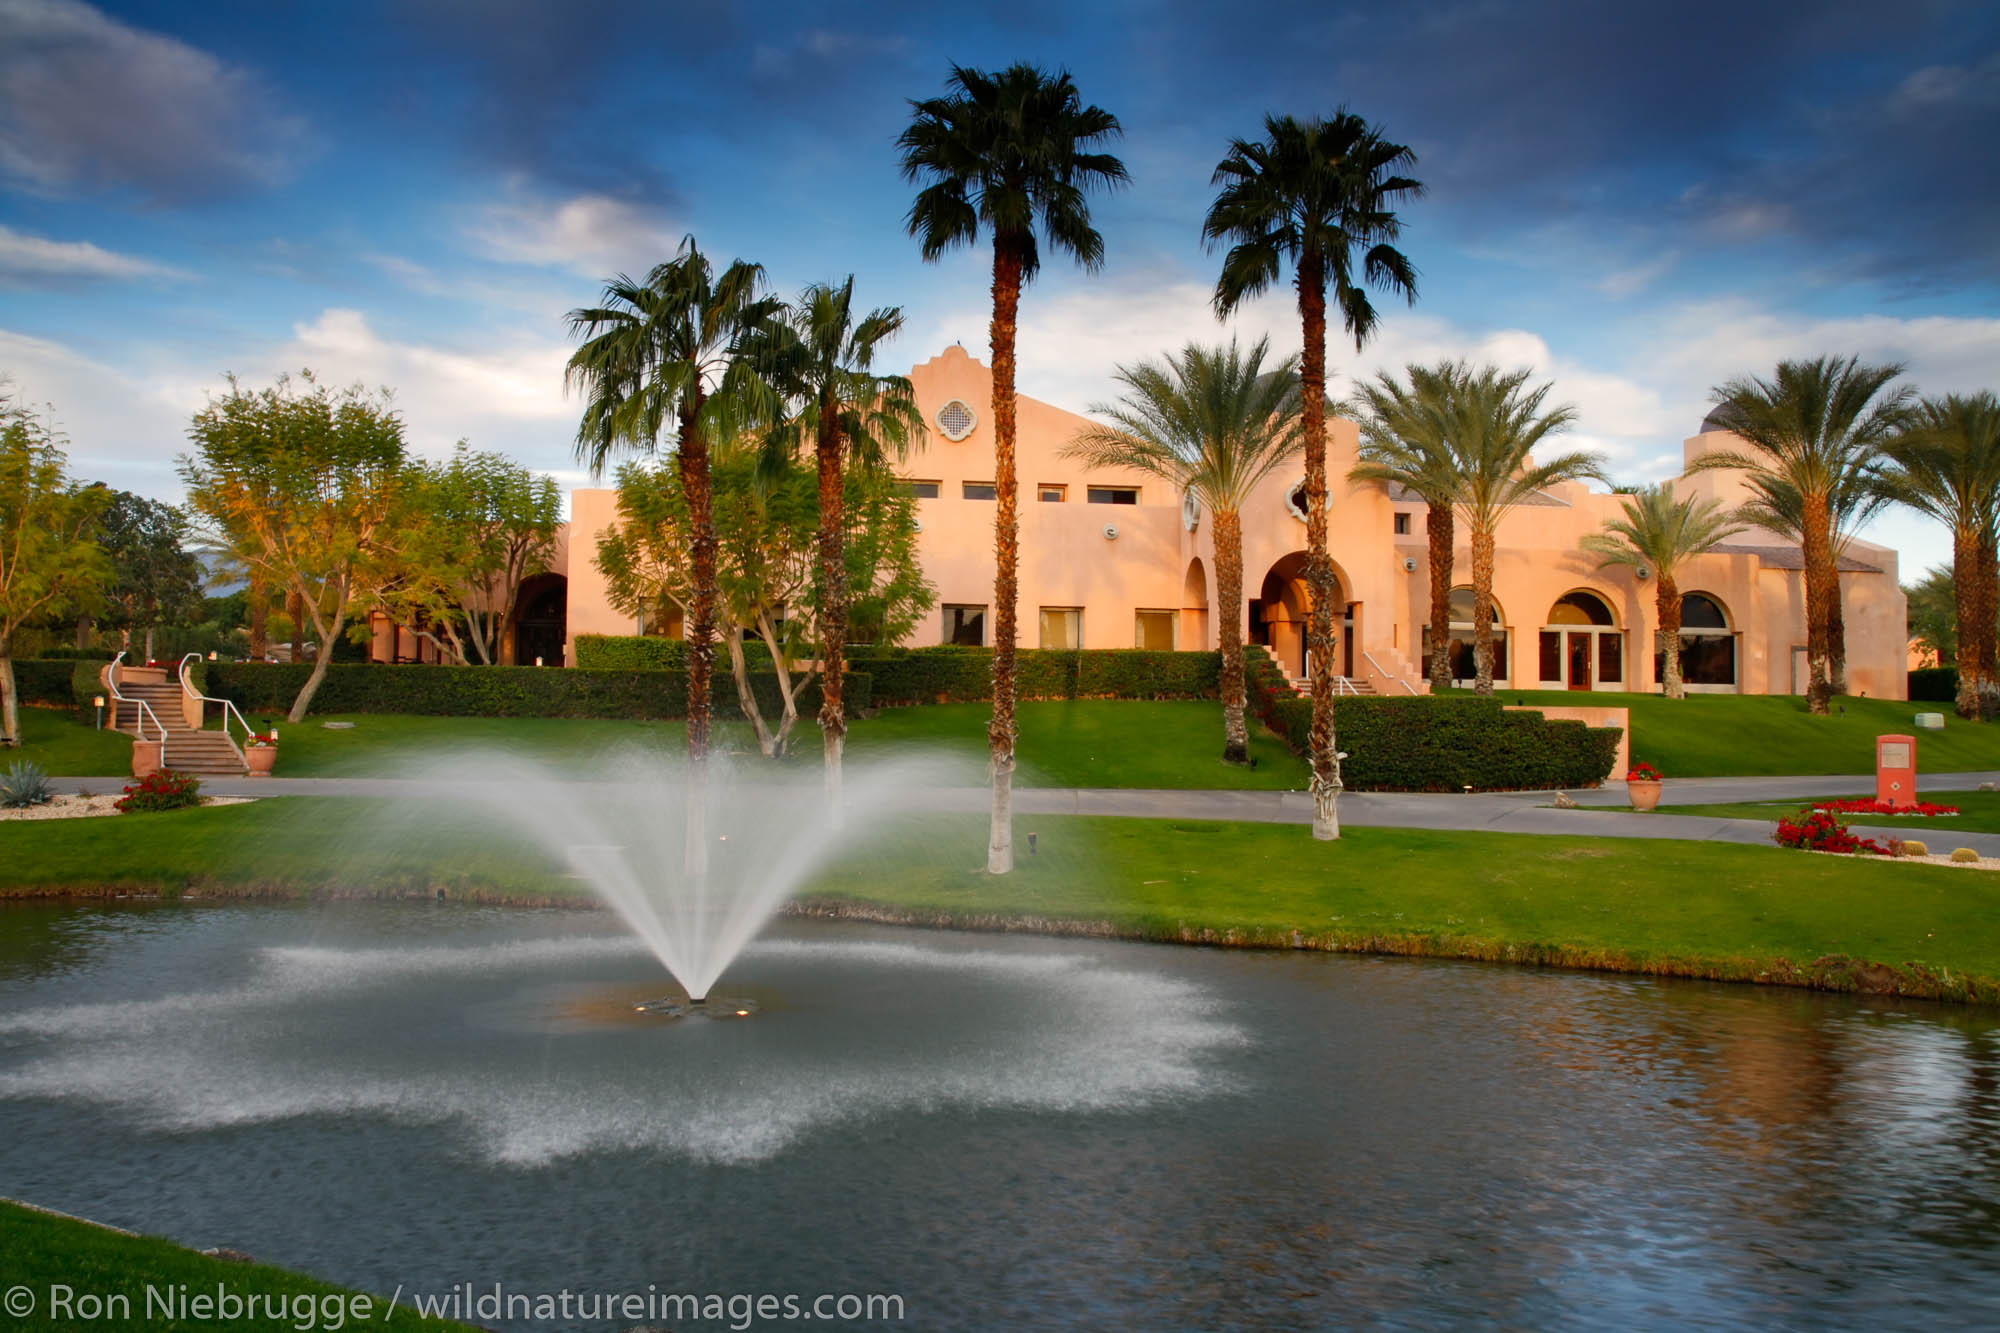 The golf course at the Westin Mission Hills Resort and Spa in Rancho Mirage near Palm Springs, California.